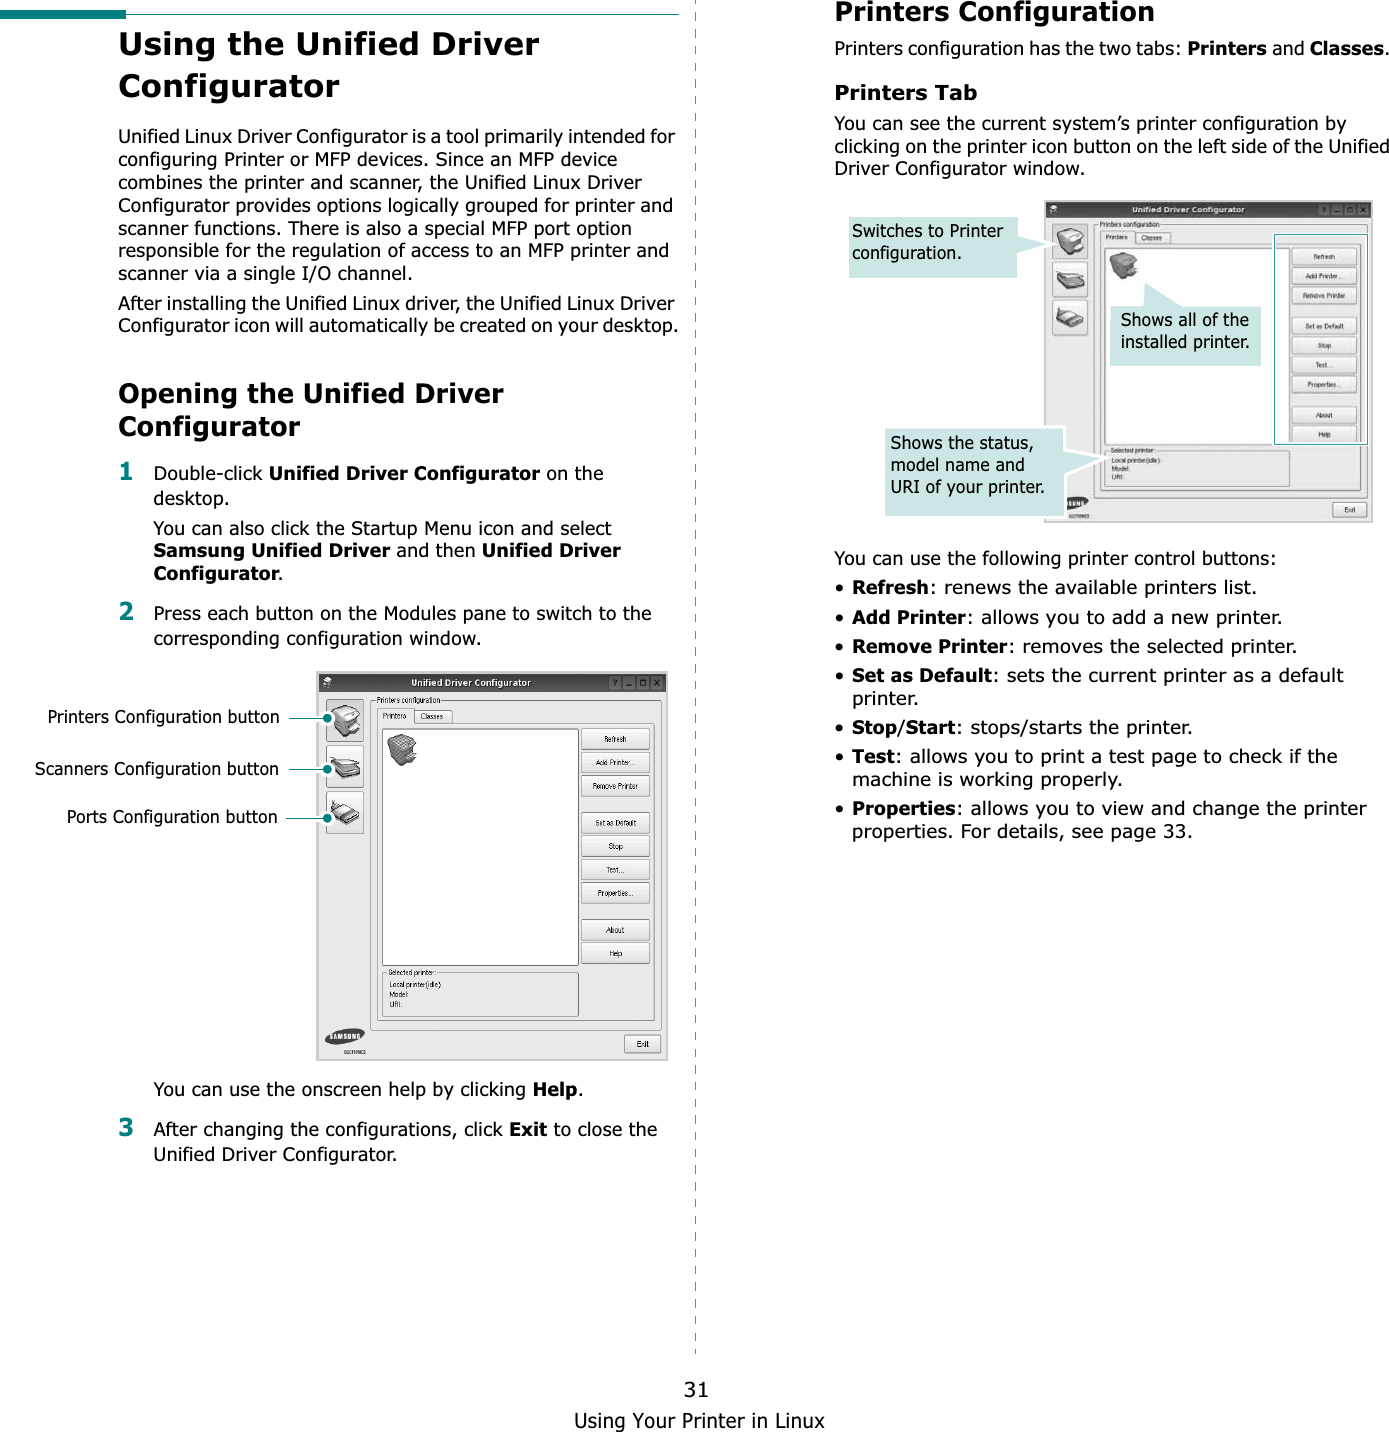 Using Your Printer in Linux31Using the Unified Driver ConfiguratorUnified Linux Driver Configurator is a tool primarily intended for configuring Printer or MFP devices. Since an MFP device combines the printer and scanner, the Unified Linux Driver Configurator provides options logically grouped for printer and scanner functions. There is also a special MFP port option responsible for the regulation of access to an MFP printer and scanner via a single I/O channel.After installing the Unified Linux driver, the Unified Linux Driver Configurator icon will automatically be created on your desktop.Opening the Unified Driver Configurator1Double-click Unified Driver Configurator on the desktop.You can also click the Startup Menu icon and select Samsung Unified Driver and then Unified Driver Configurator.2Press each button on the Modules pane to switch to the corresponding configuration window.   You can use the onscreen help by clicking Help.3After changing the configurations, click Exit to close the Unified Driver Configurator.Printers Configuration buttonScanners Configuration buttonPorts Configuration buttonPrinters ConfigurationPrinters configuration has the two tabs: Printers and Classes.Printers TabYou can see the current system’s printer configuration by clicking on the printer icon button on the left side of the Unified Driver Configurator window.You can use the following printer control buttons:•Refresh: renews the available printers list.•Add Printer: allows you to add a new printer.•Remove Printer: removes the selected printer.•Set as Default: sets the current printer as a default printer.•Stop/Start: stops/starts the printer.•Test: allows you to print a test page to check if the machine is working properly.•Properties: allows you to view and change the printer properties. For details, see page 33.Shows all of the installed printer.Switches to Printer configuration.Shows the status, model name and URI of your printer.